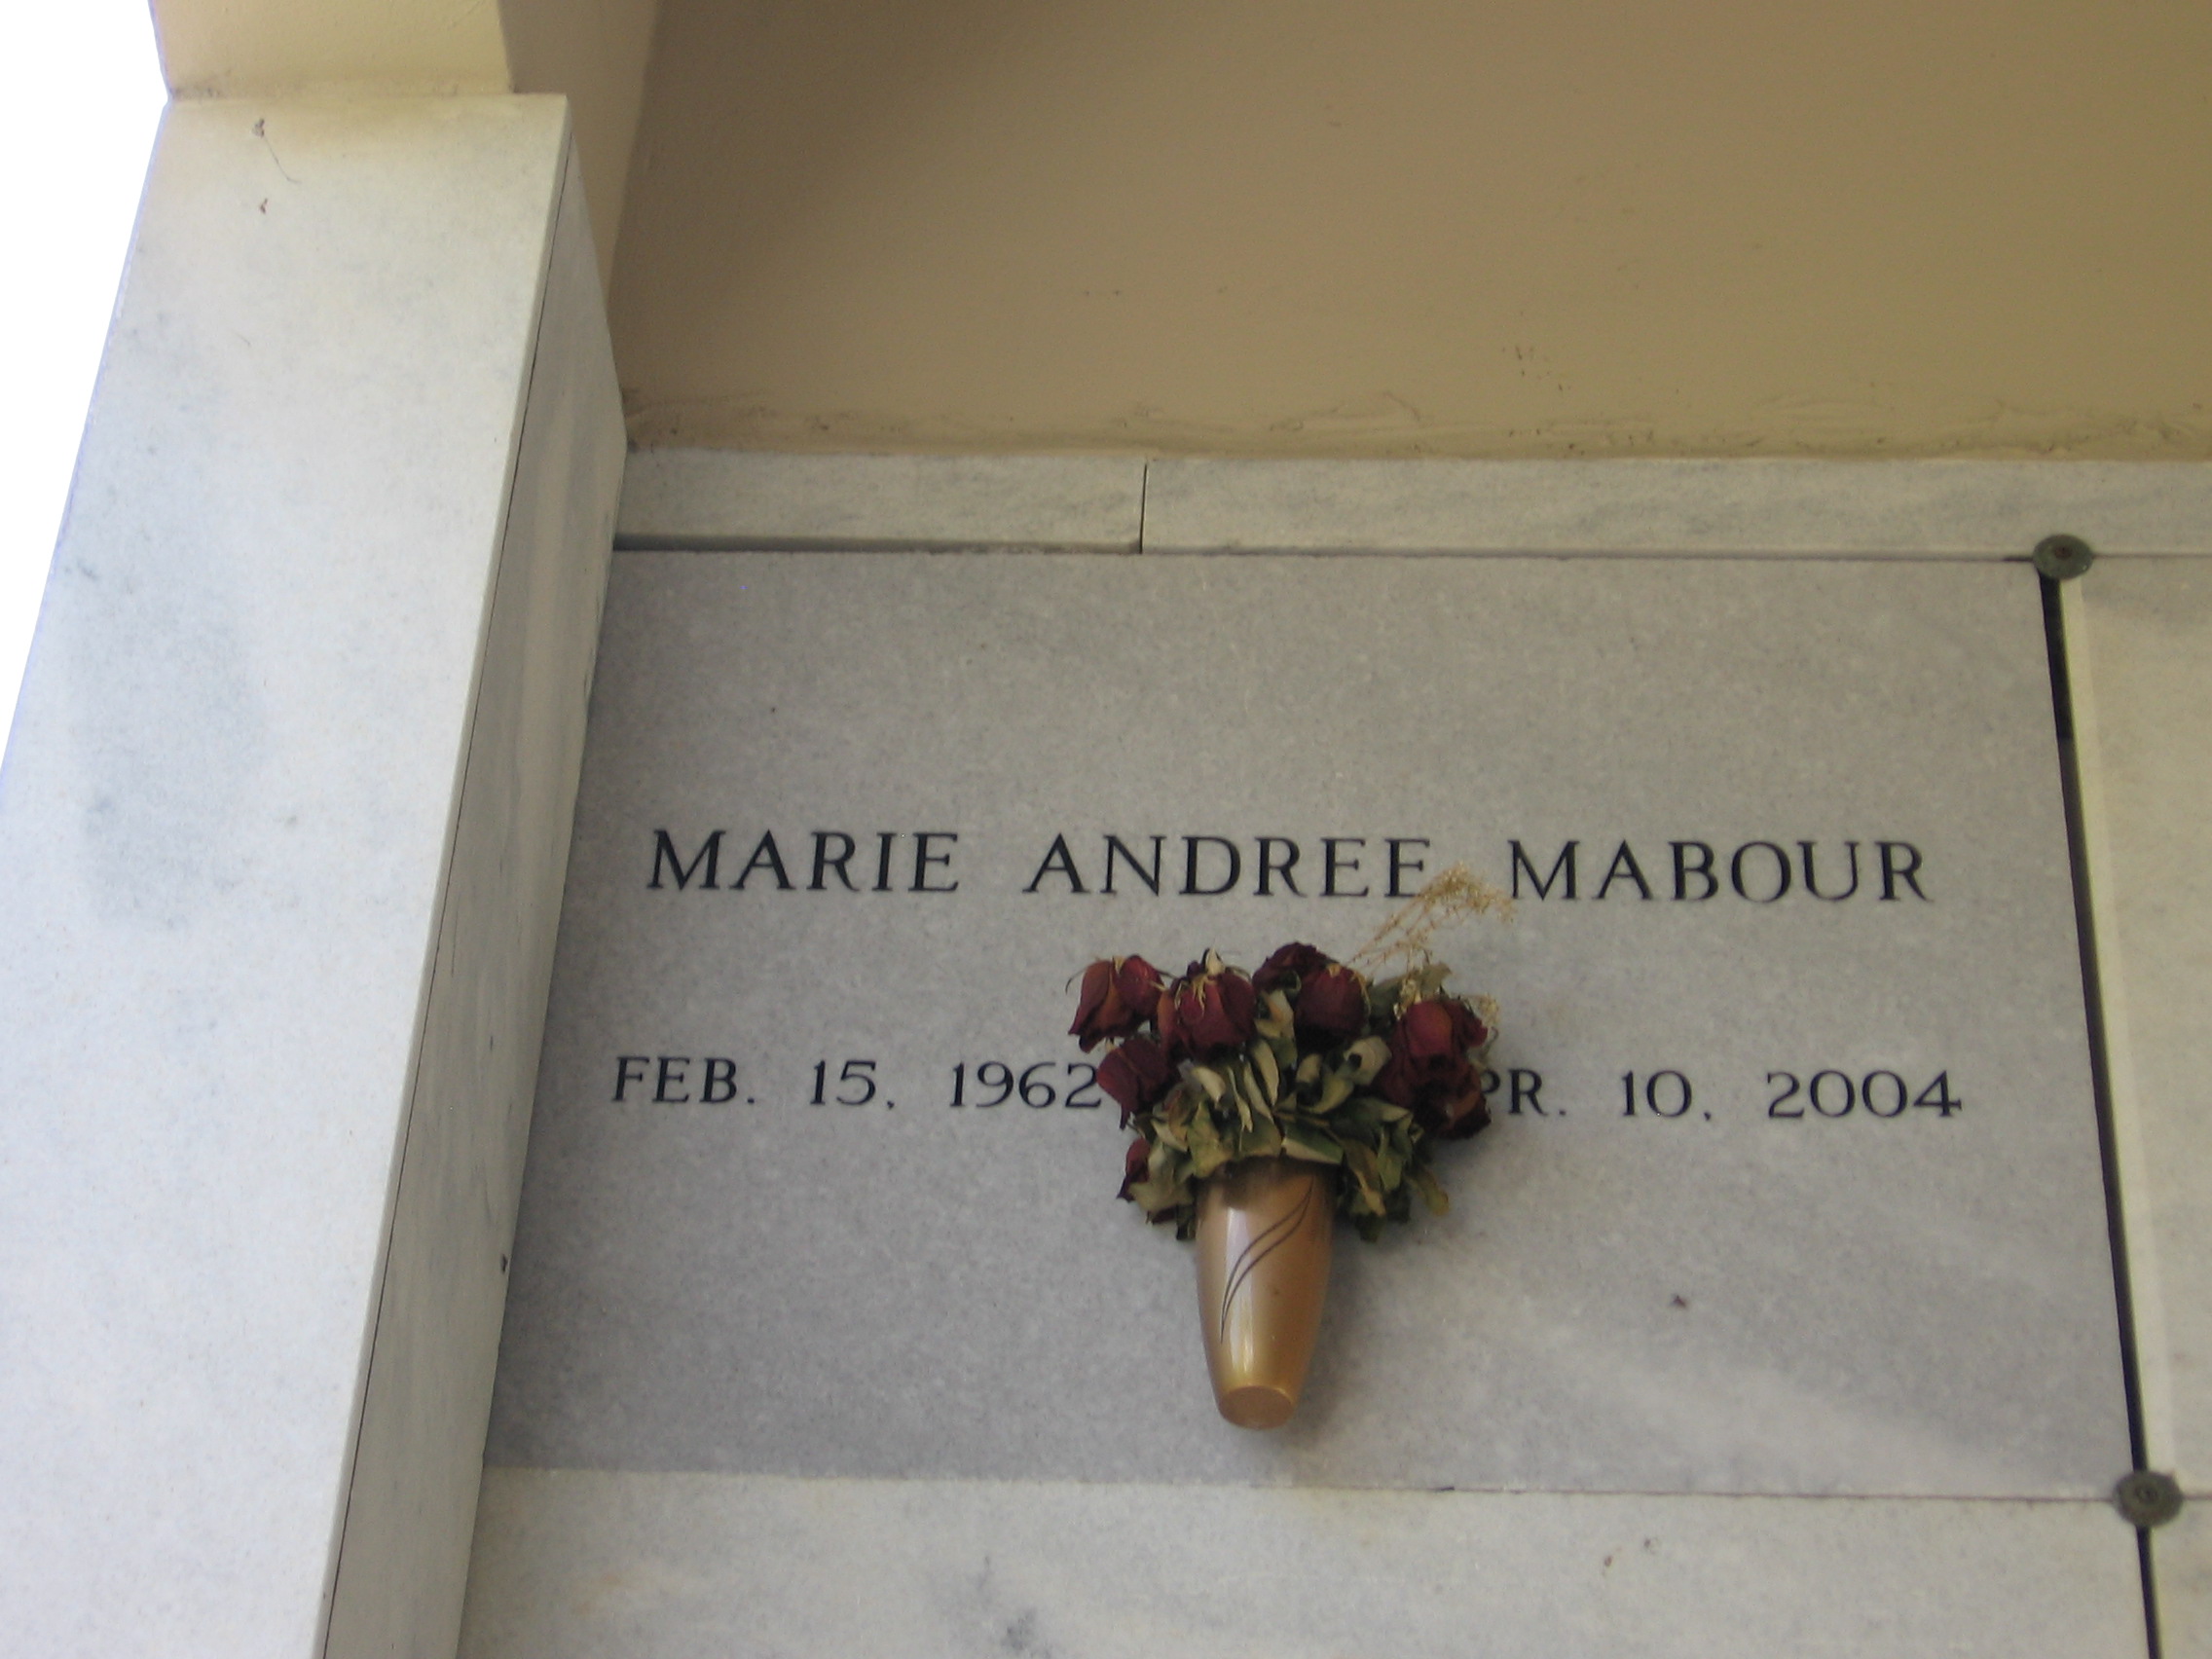 Marie Andree Mabour